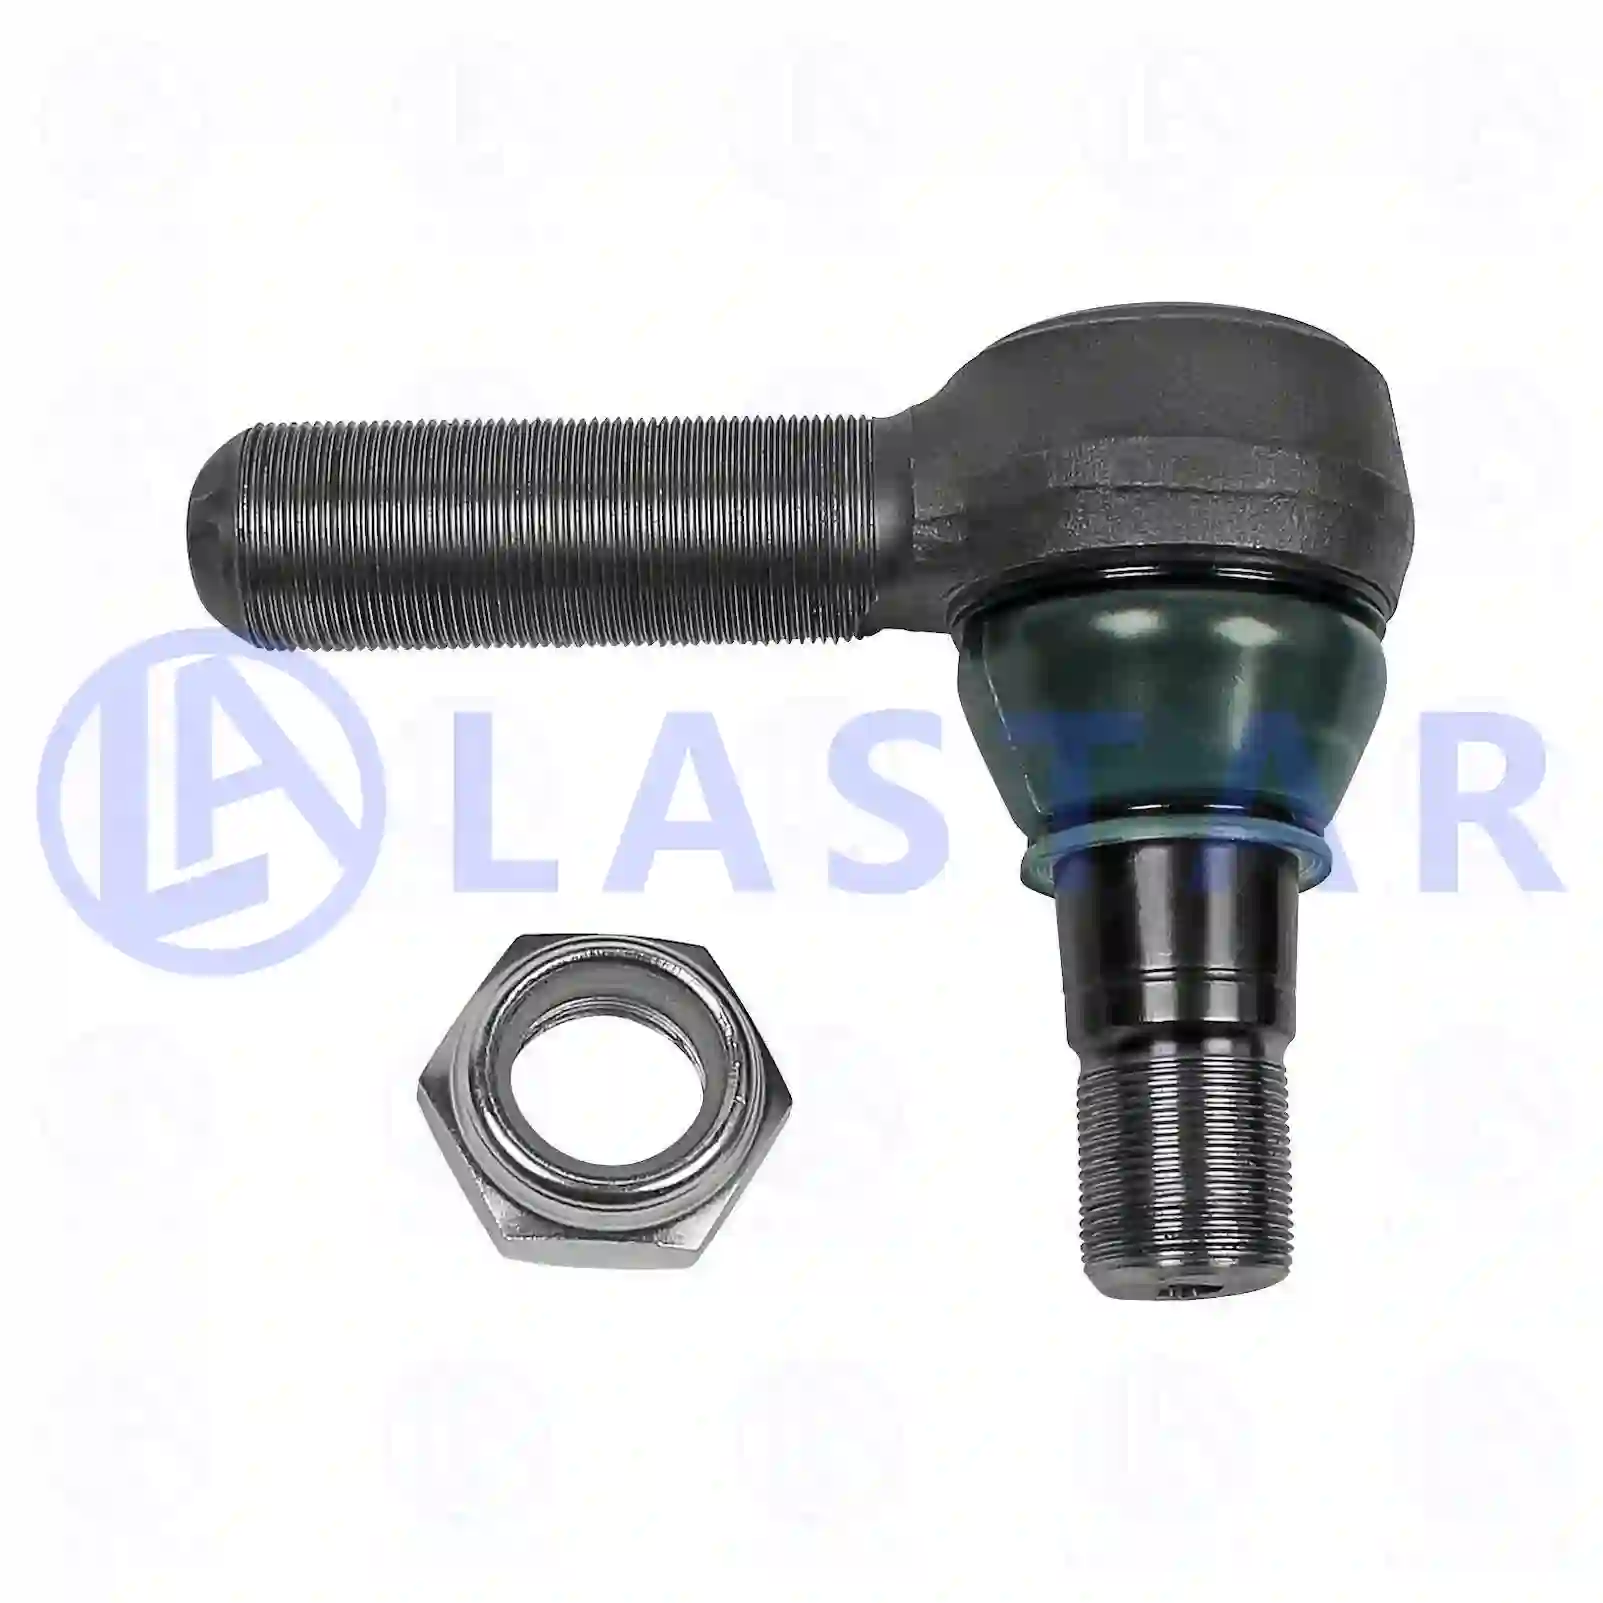 Ball joint, right hand thread, 77705370, 404P892H23, 81953016324, 0004605748, 0004606048, 0004606848, 0004607048, 0004607548, 0014600448, 0014601148, 0014601748, 0014602448, 0014607648, 0014609648, AN85778002, ZG40391-0008 ||  77705370 Lastar Spare Part | Truck Spare Parts, Auotomotive Spare Parts Ball joint, right hand thread, 77705370, 404P892H23, 81953016324, 0004605748, 0004606048, 0004606848, 0004607048, 0004607548, 0014600448, 0014601148, 0014601748, 0014602448, 0014607648, 0014609648, AN85778002, ZG40391-0008 ||  77705370 Lastar Spare Part | Truck Spare Parts, Auotomotive Spare Parts